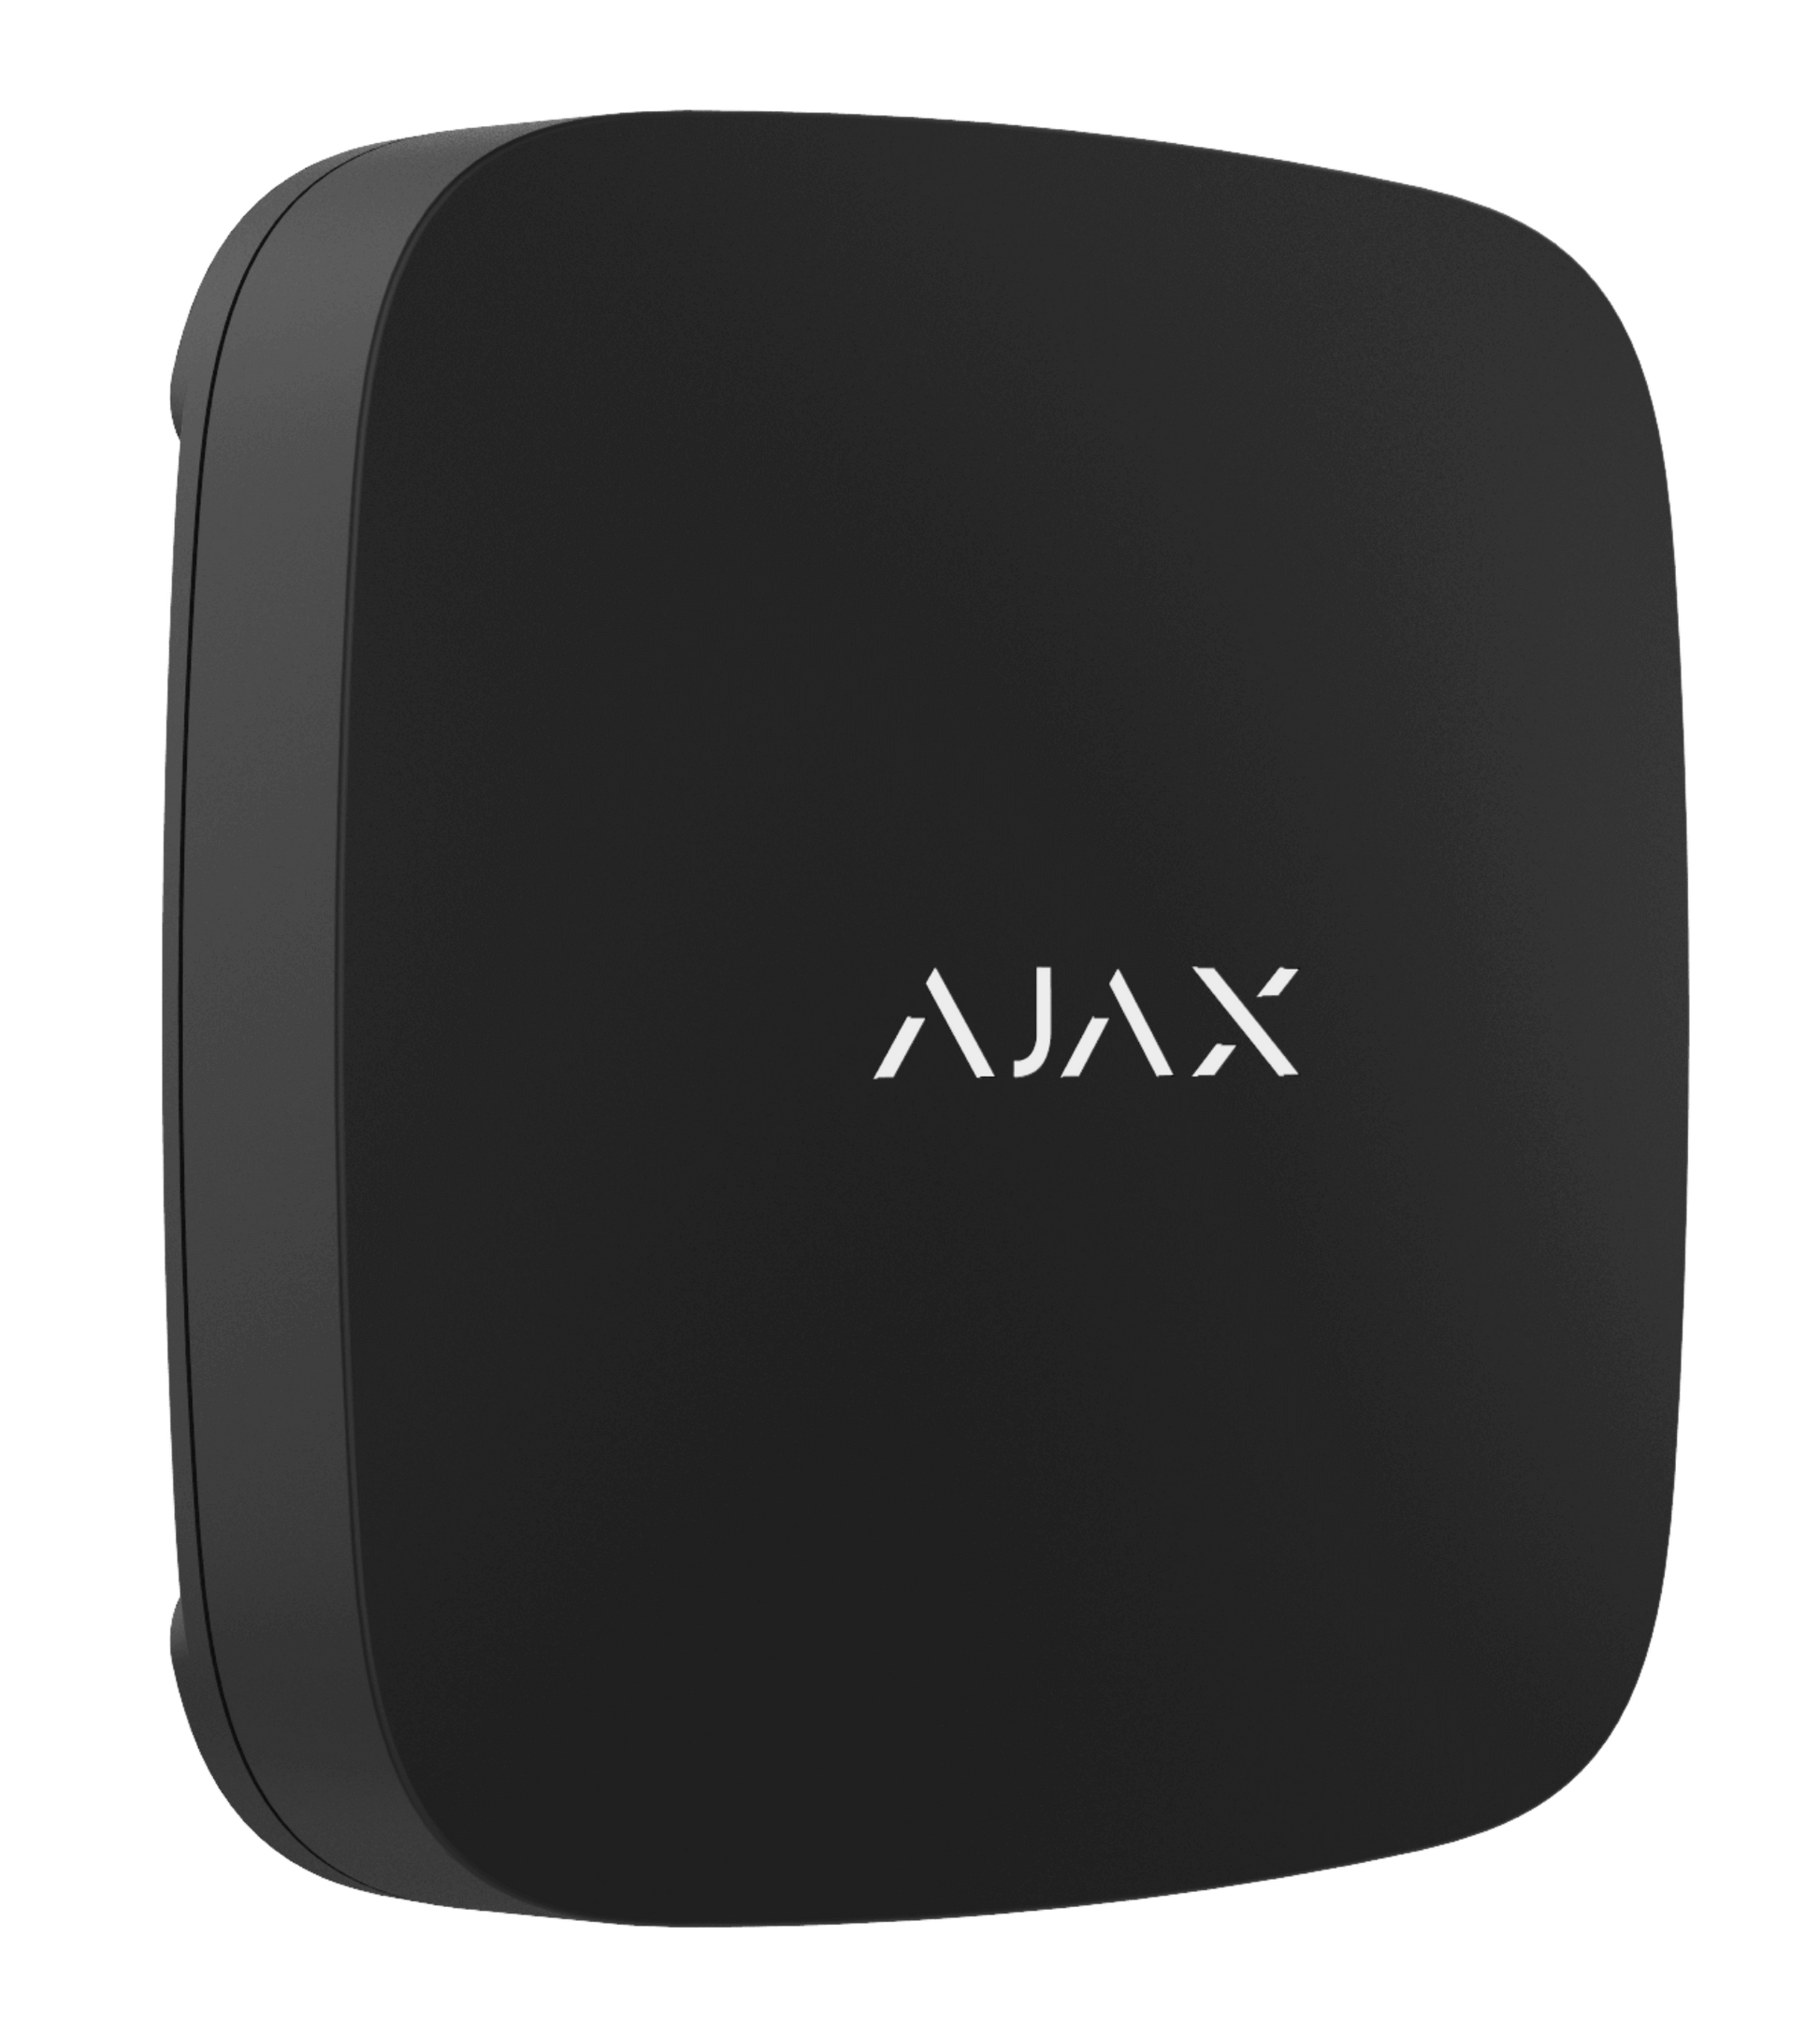 Black Ajax LeaksProtect a leak detection device for home and business security and flooding detection.  56 × 56 × 14 mm in size, 61 grams in weight, turned view of device, IP65 rated